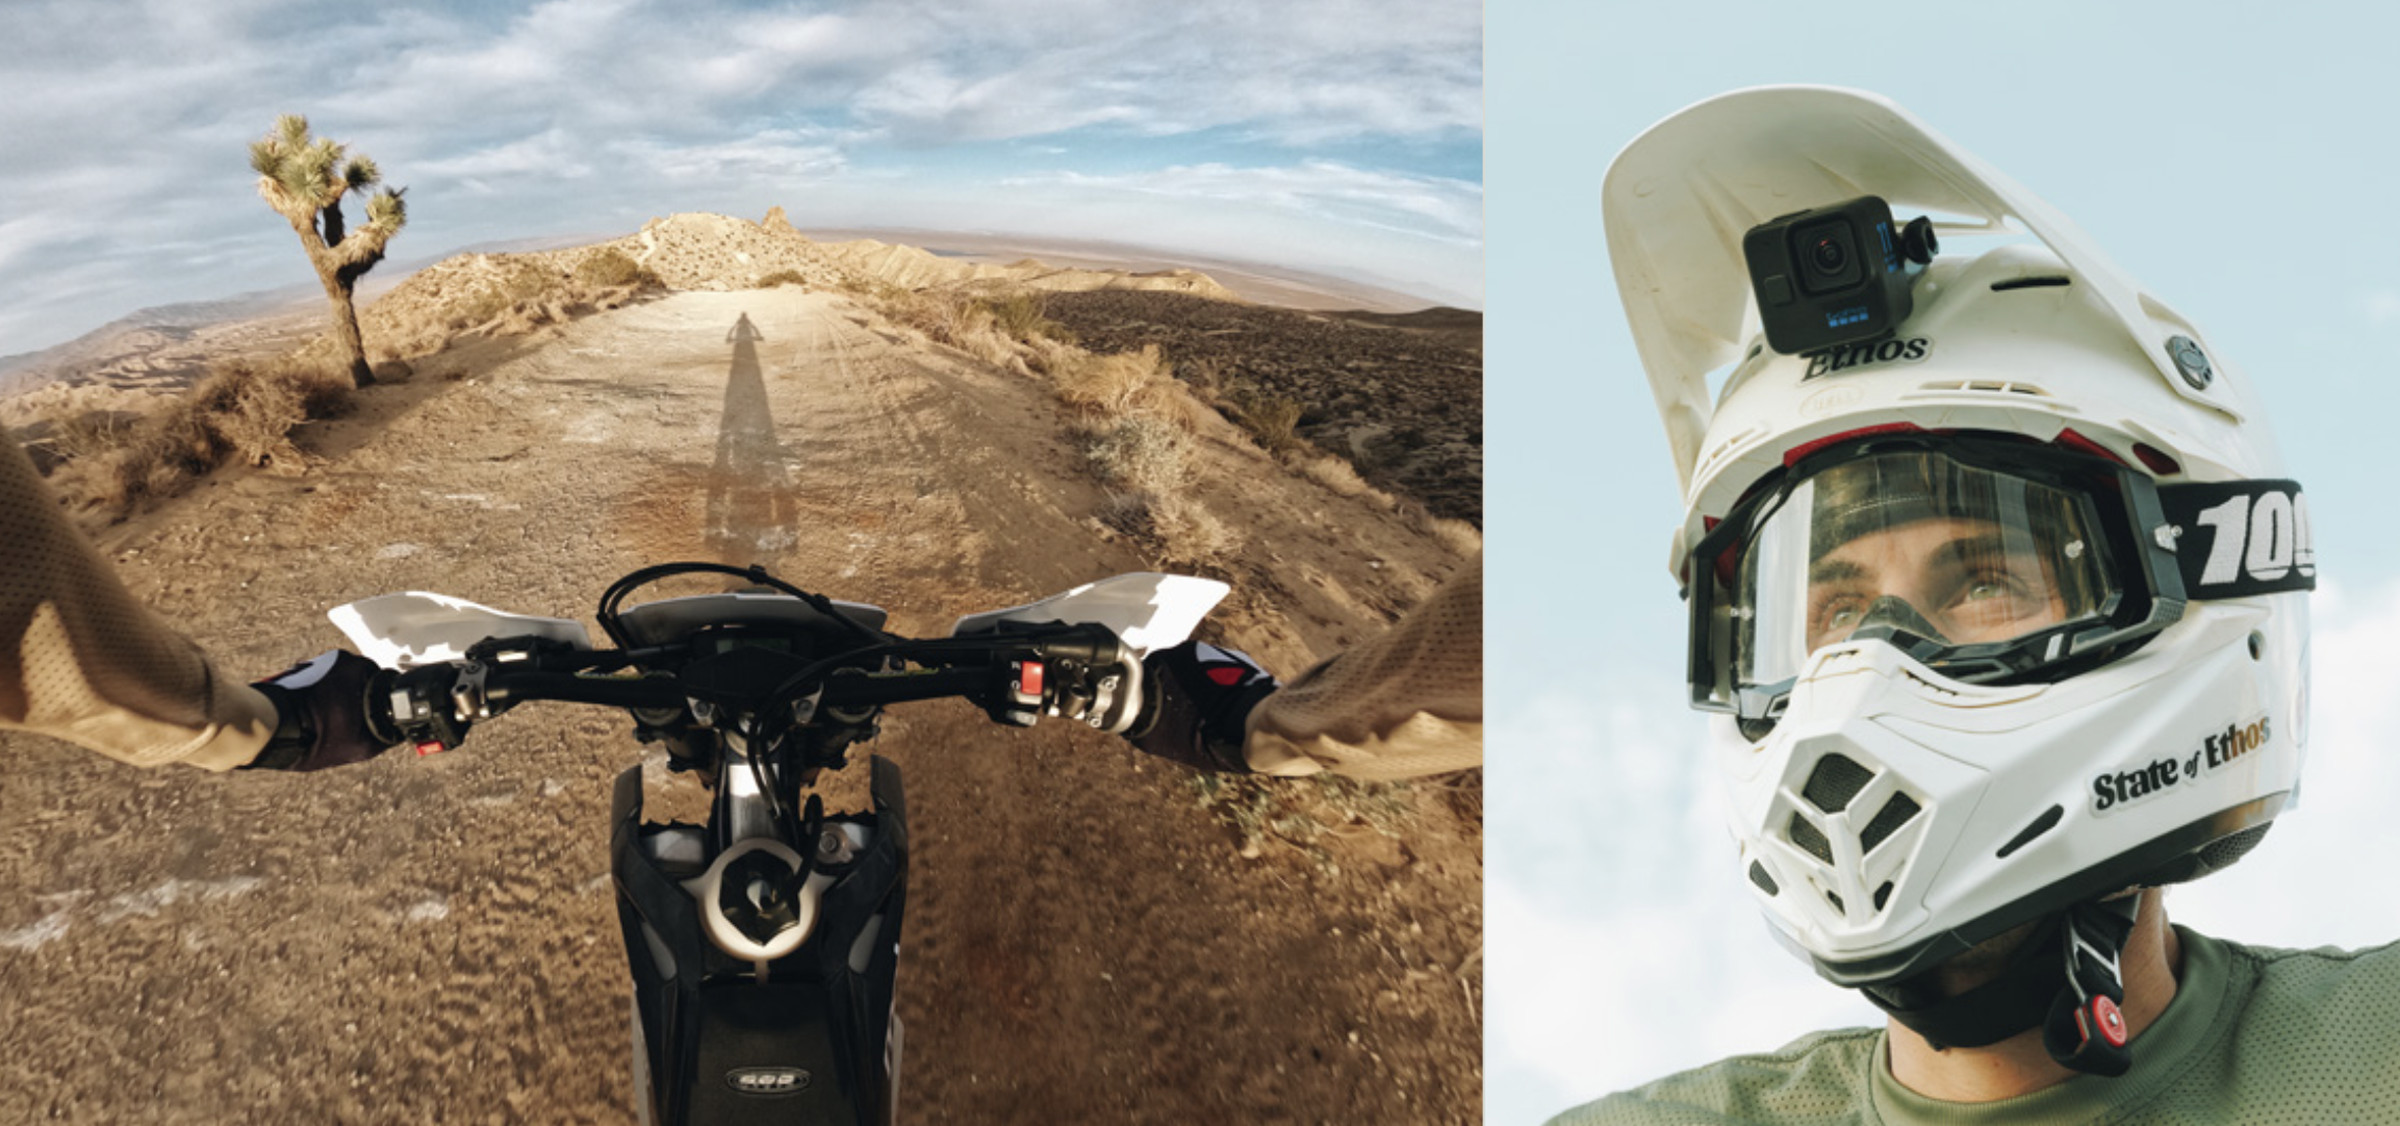 An image on the left shows dirt bike handle bars in a desert scene. An image on the right shows someone wearing a full-face helmet, with a GoPro Mini mounted beneath the visor.